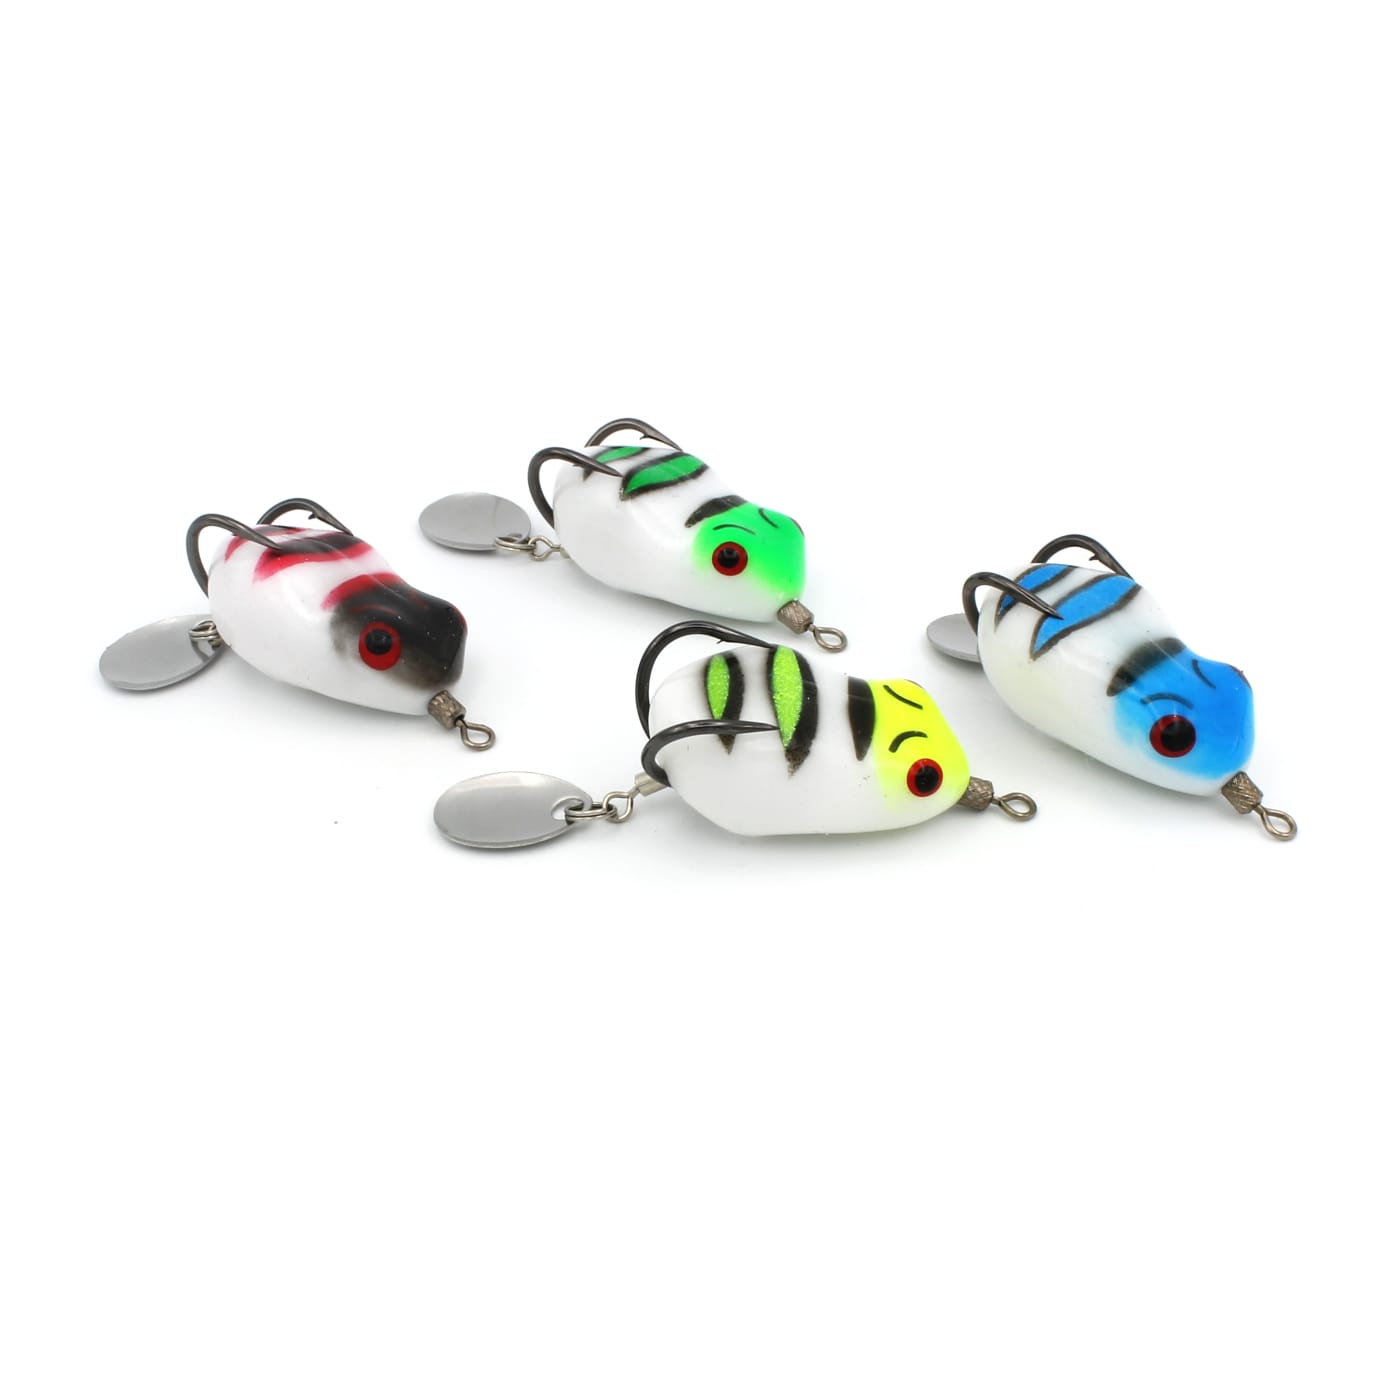 TAKEDO high quality LW039 8cm 25g jump frog lure hollow body frog lure  Topwater Ray Frog Artificial 3D Eyes